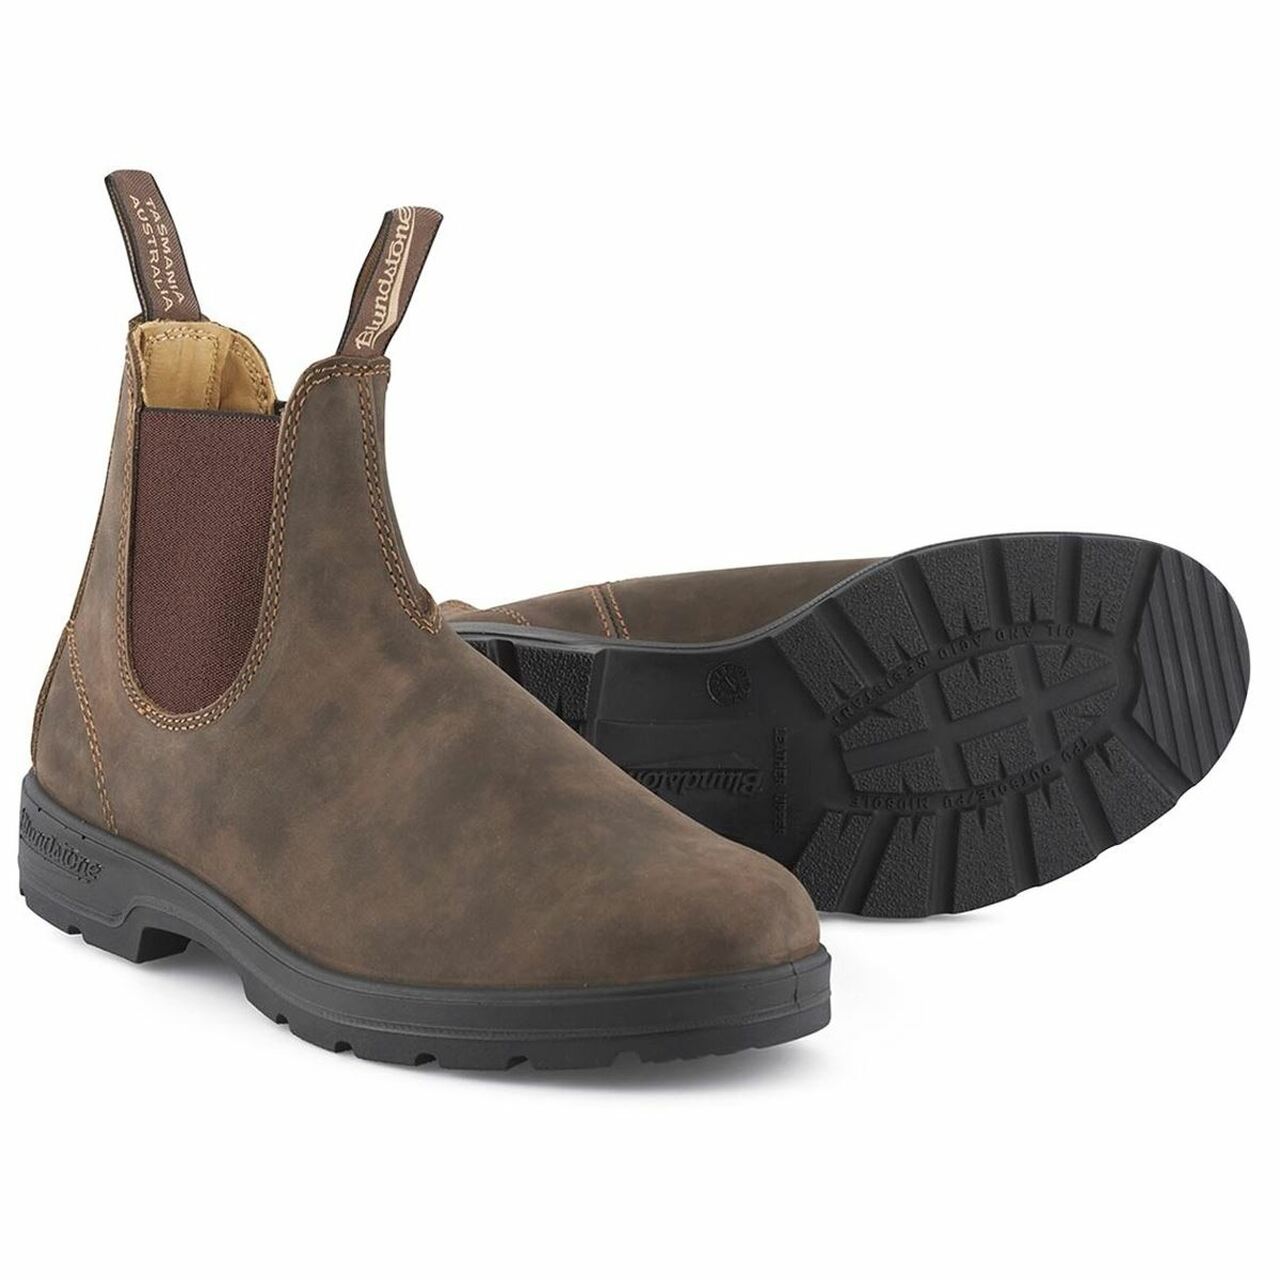 Blundstone 585 Classic Chelsea Boots - Rustic Brown